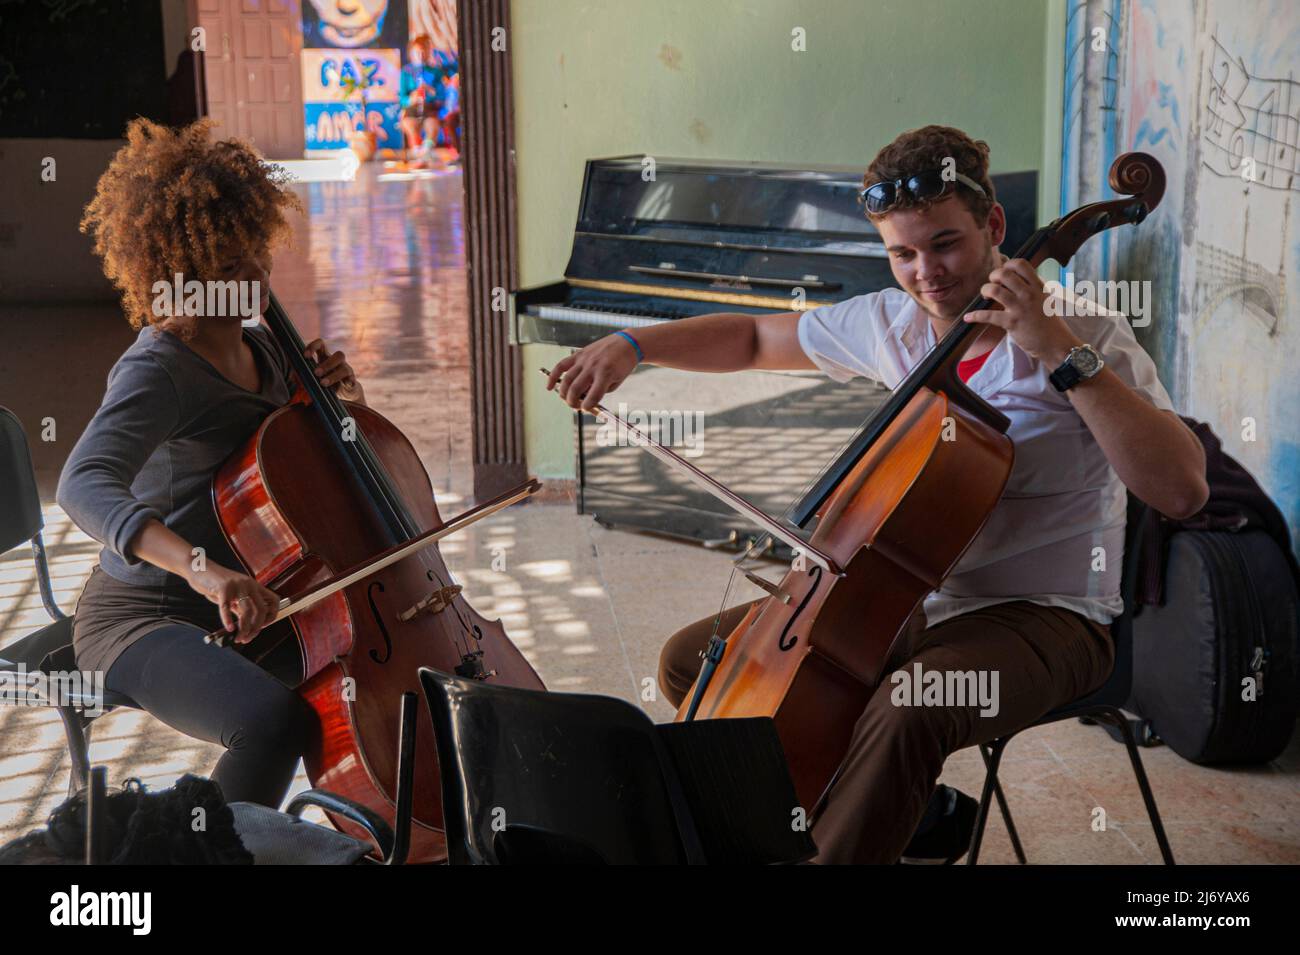 Young students rehearse playing the cello at a school in Matanzes, Cuba with a painting of John Lennon and Yoko Ono on the wall behind them. Stock Photo